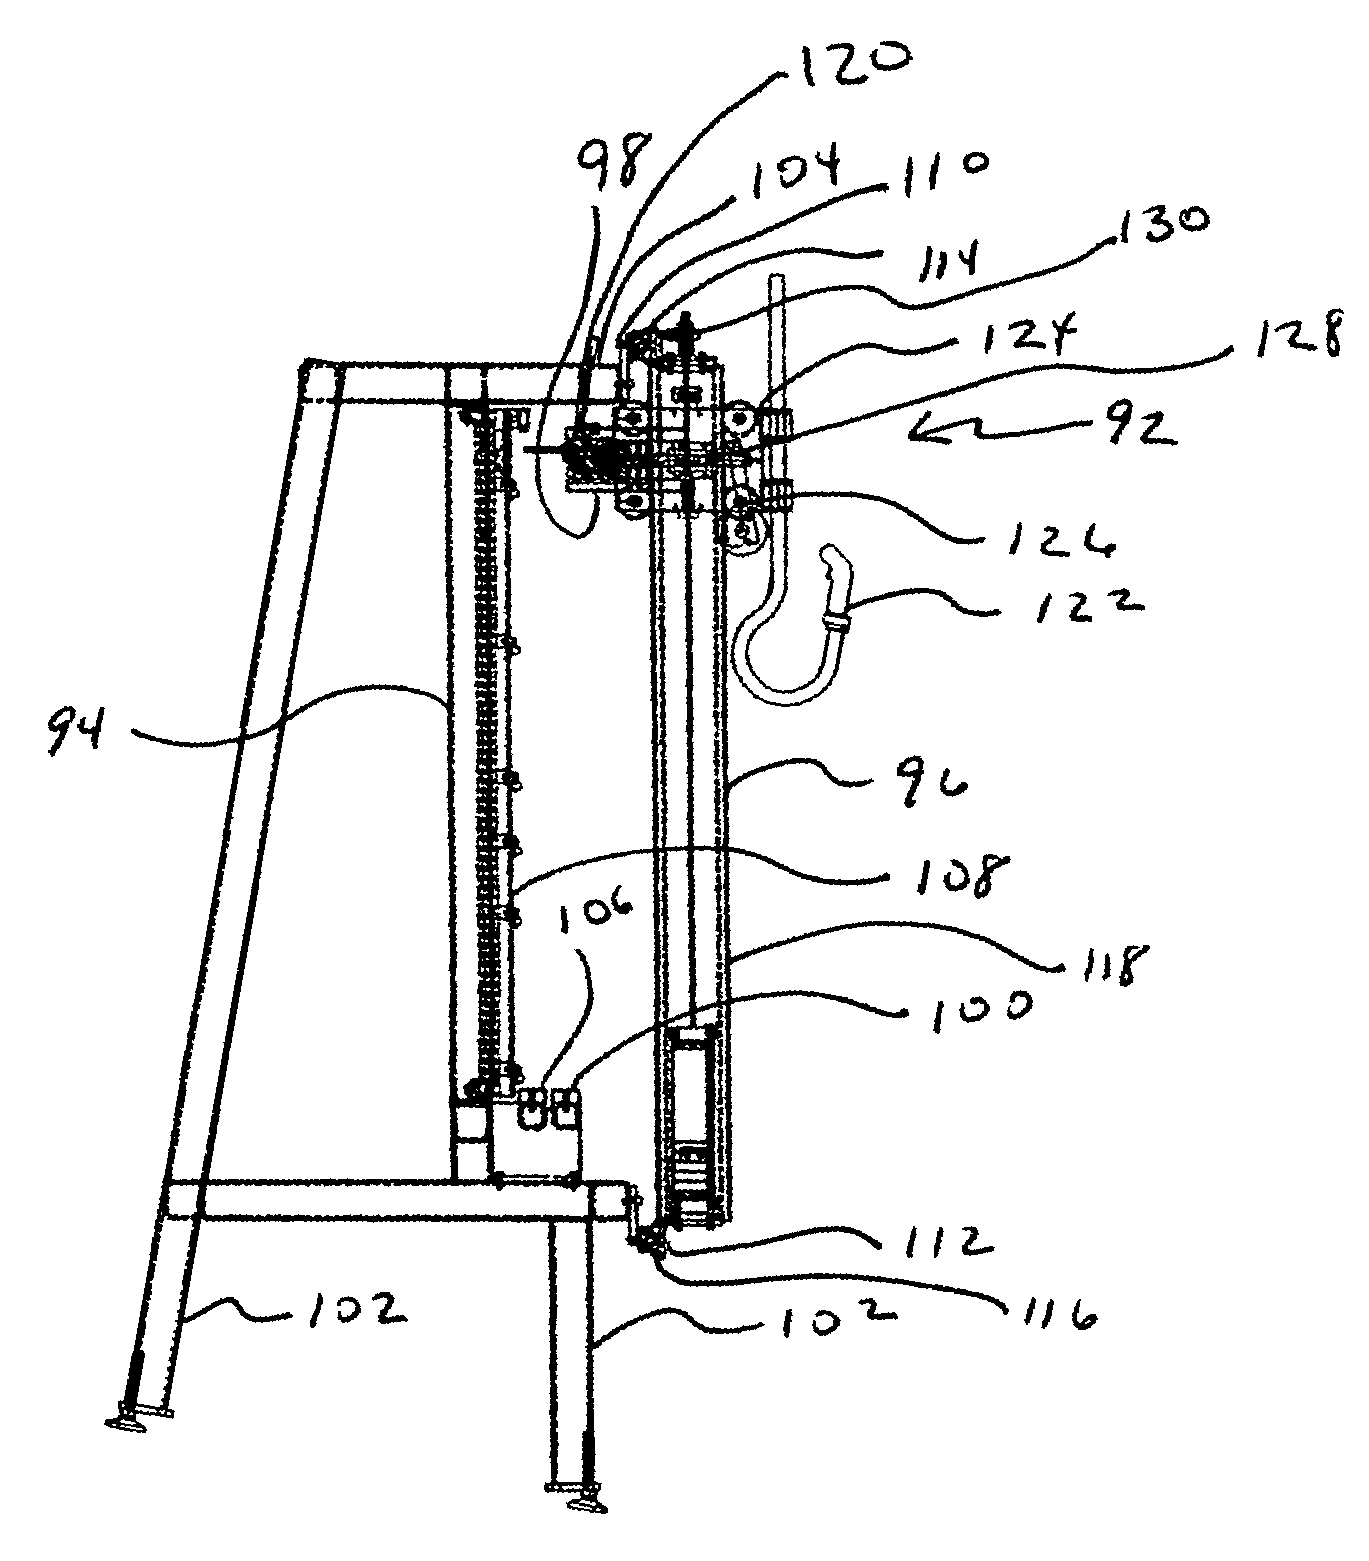 System and process for glazing glass to windows and door frames